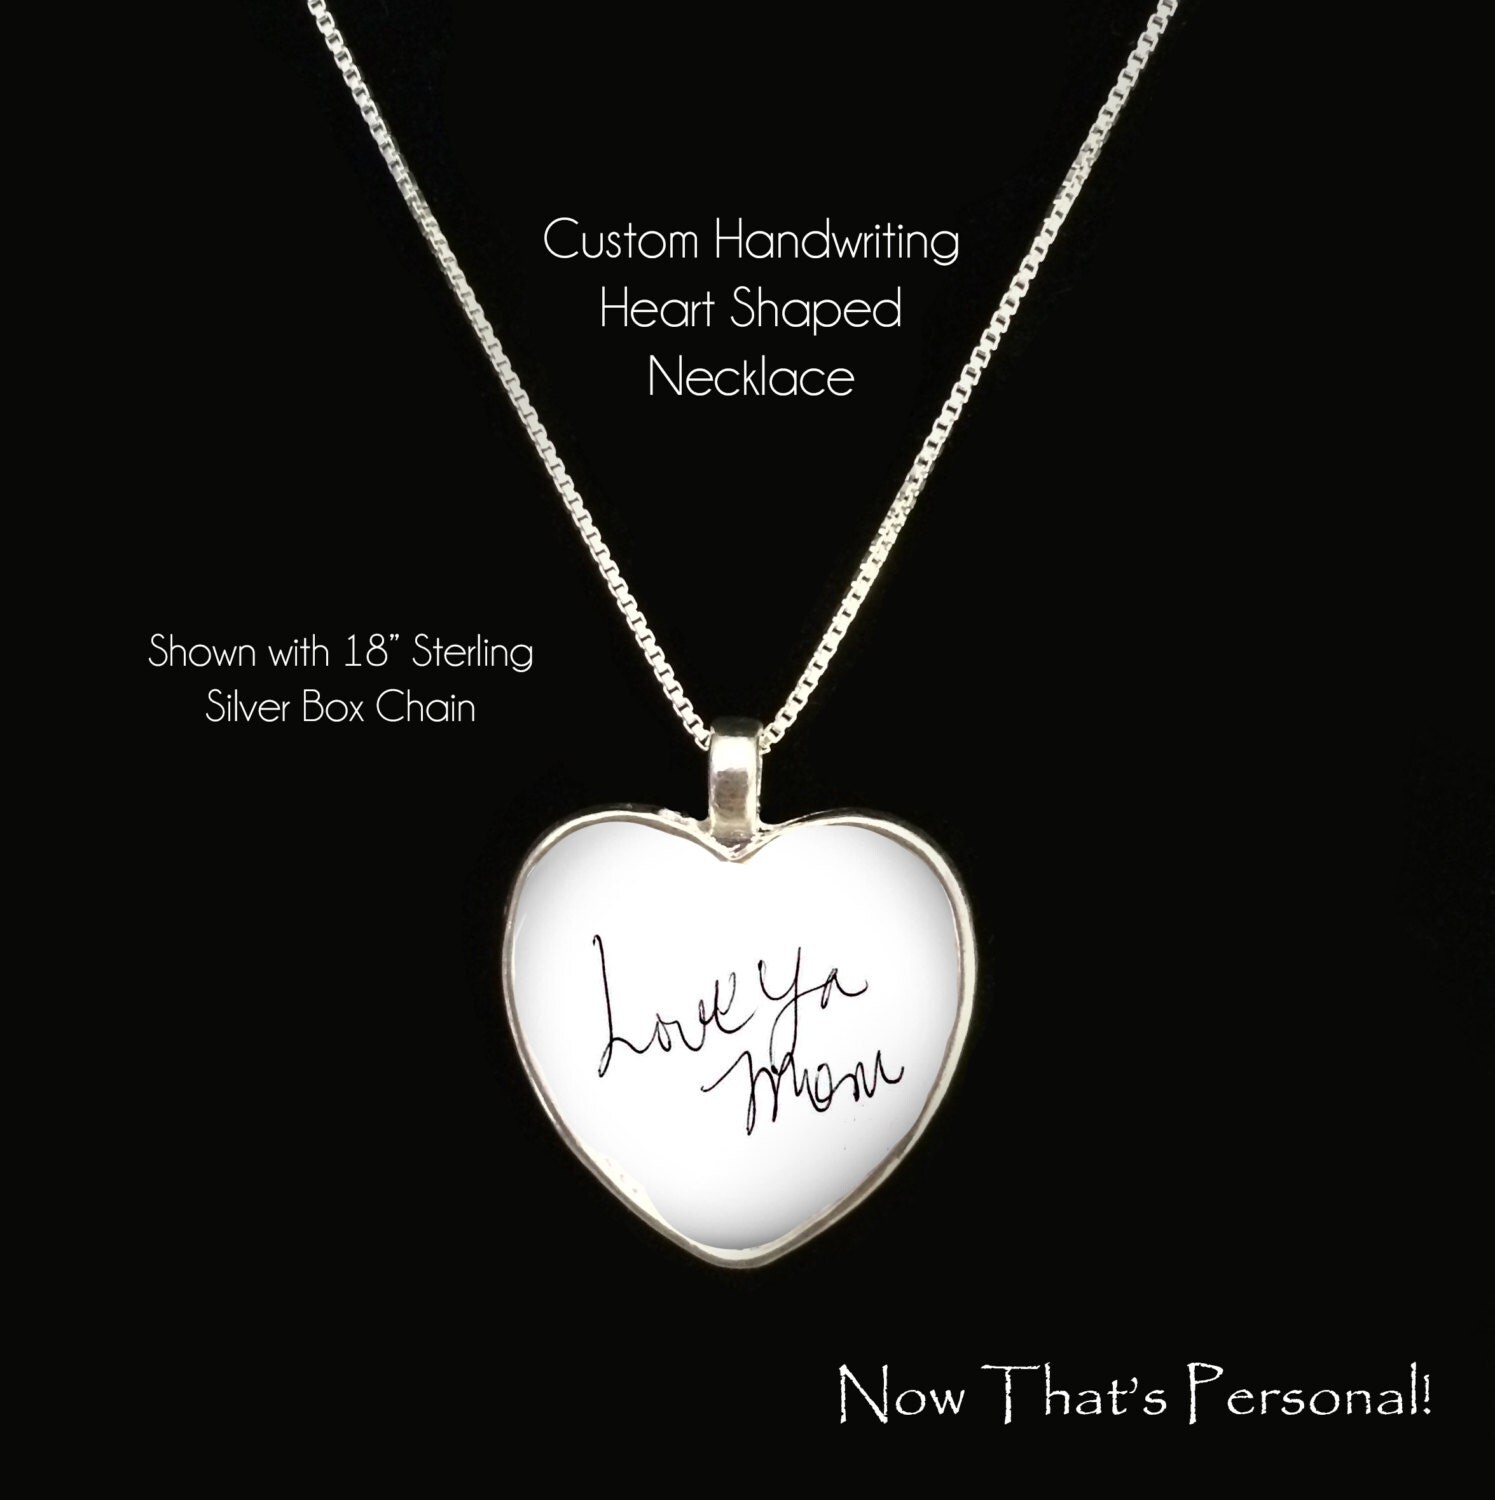 VALENTINE'S DAY GIFT Heart shaped Handwriting necklace